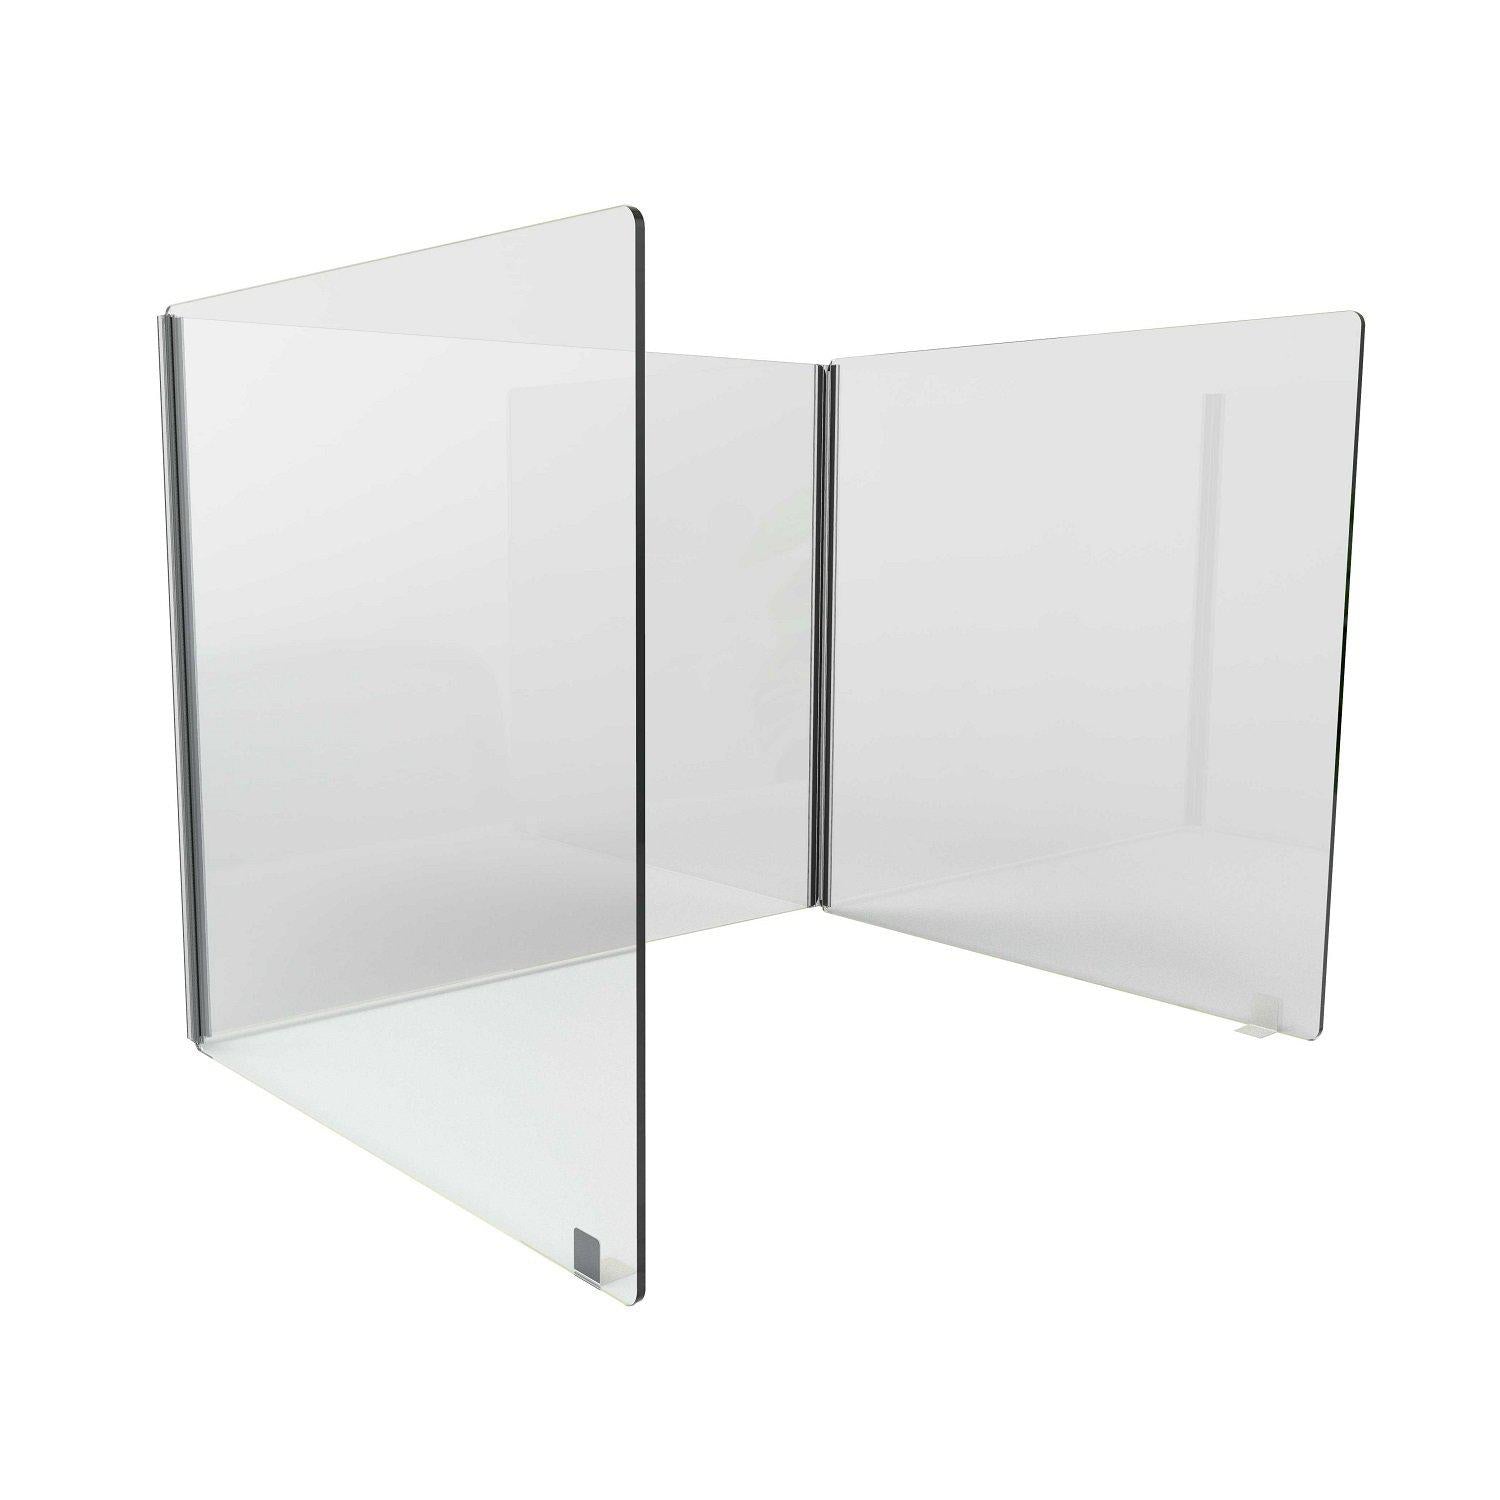 3-Sided Clear Thermoplastic Desktop Protection Screen/Sneeze Guard, 24”H x 30”W x 16”D